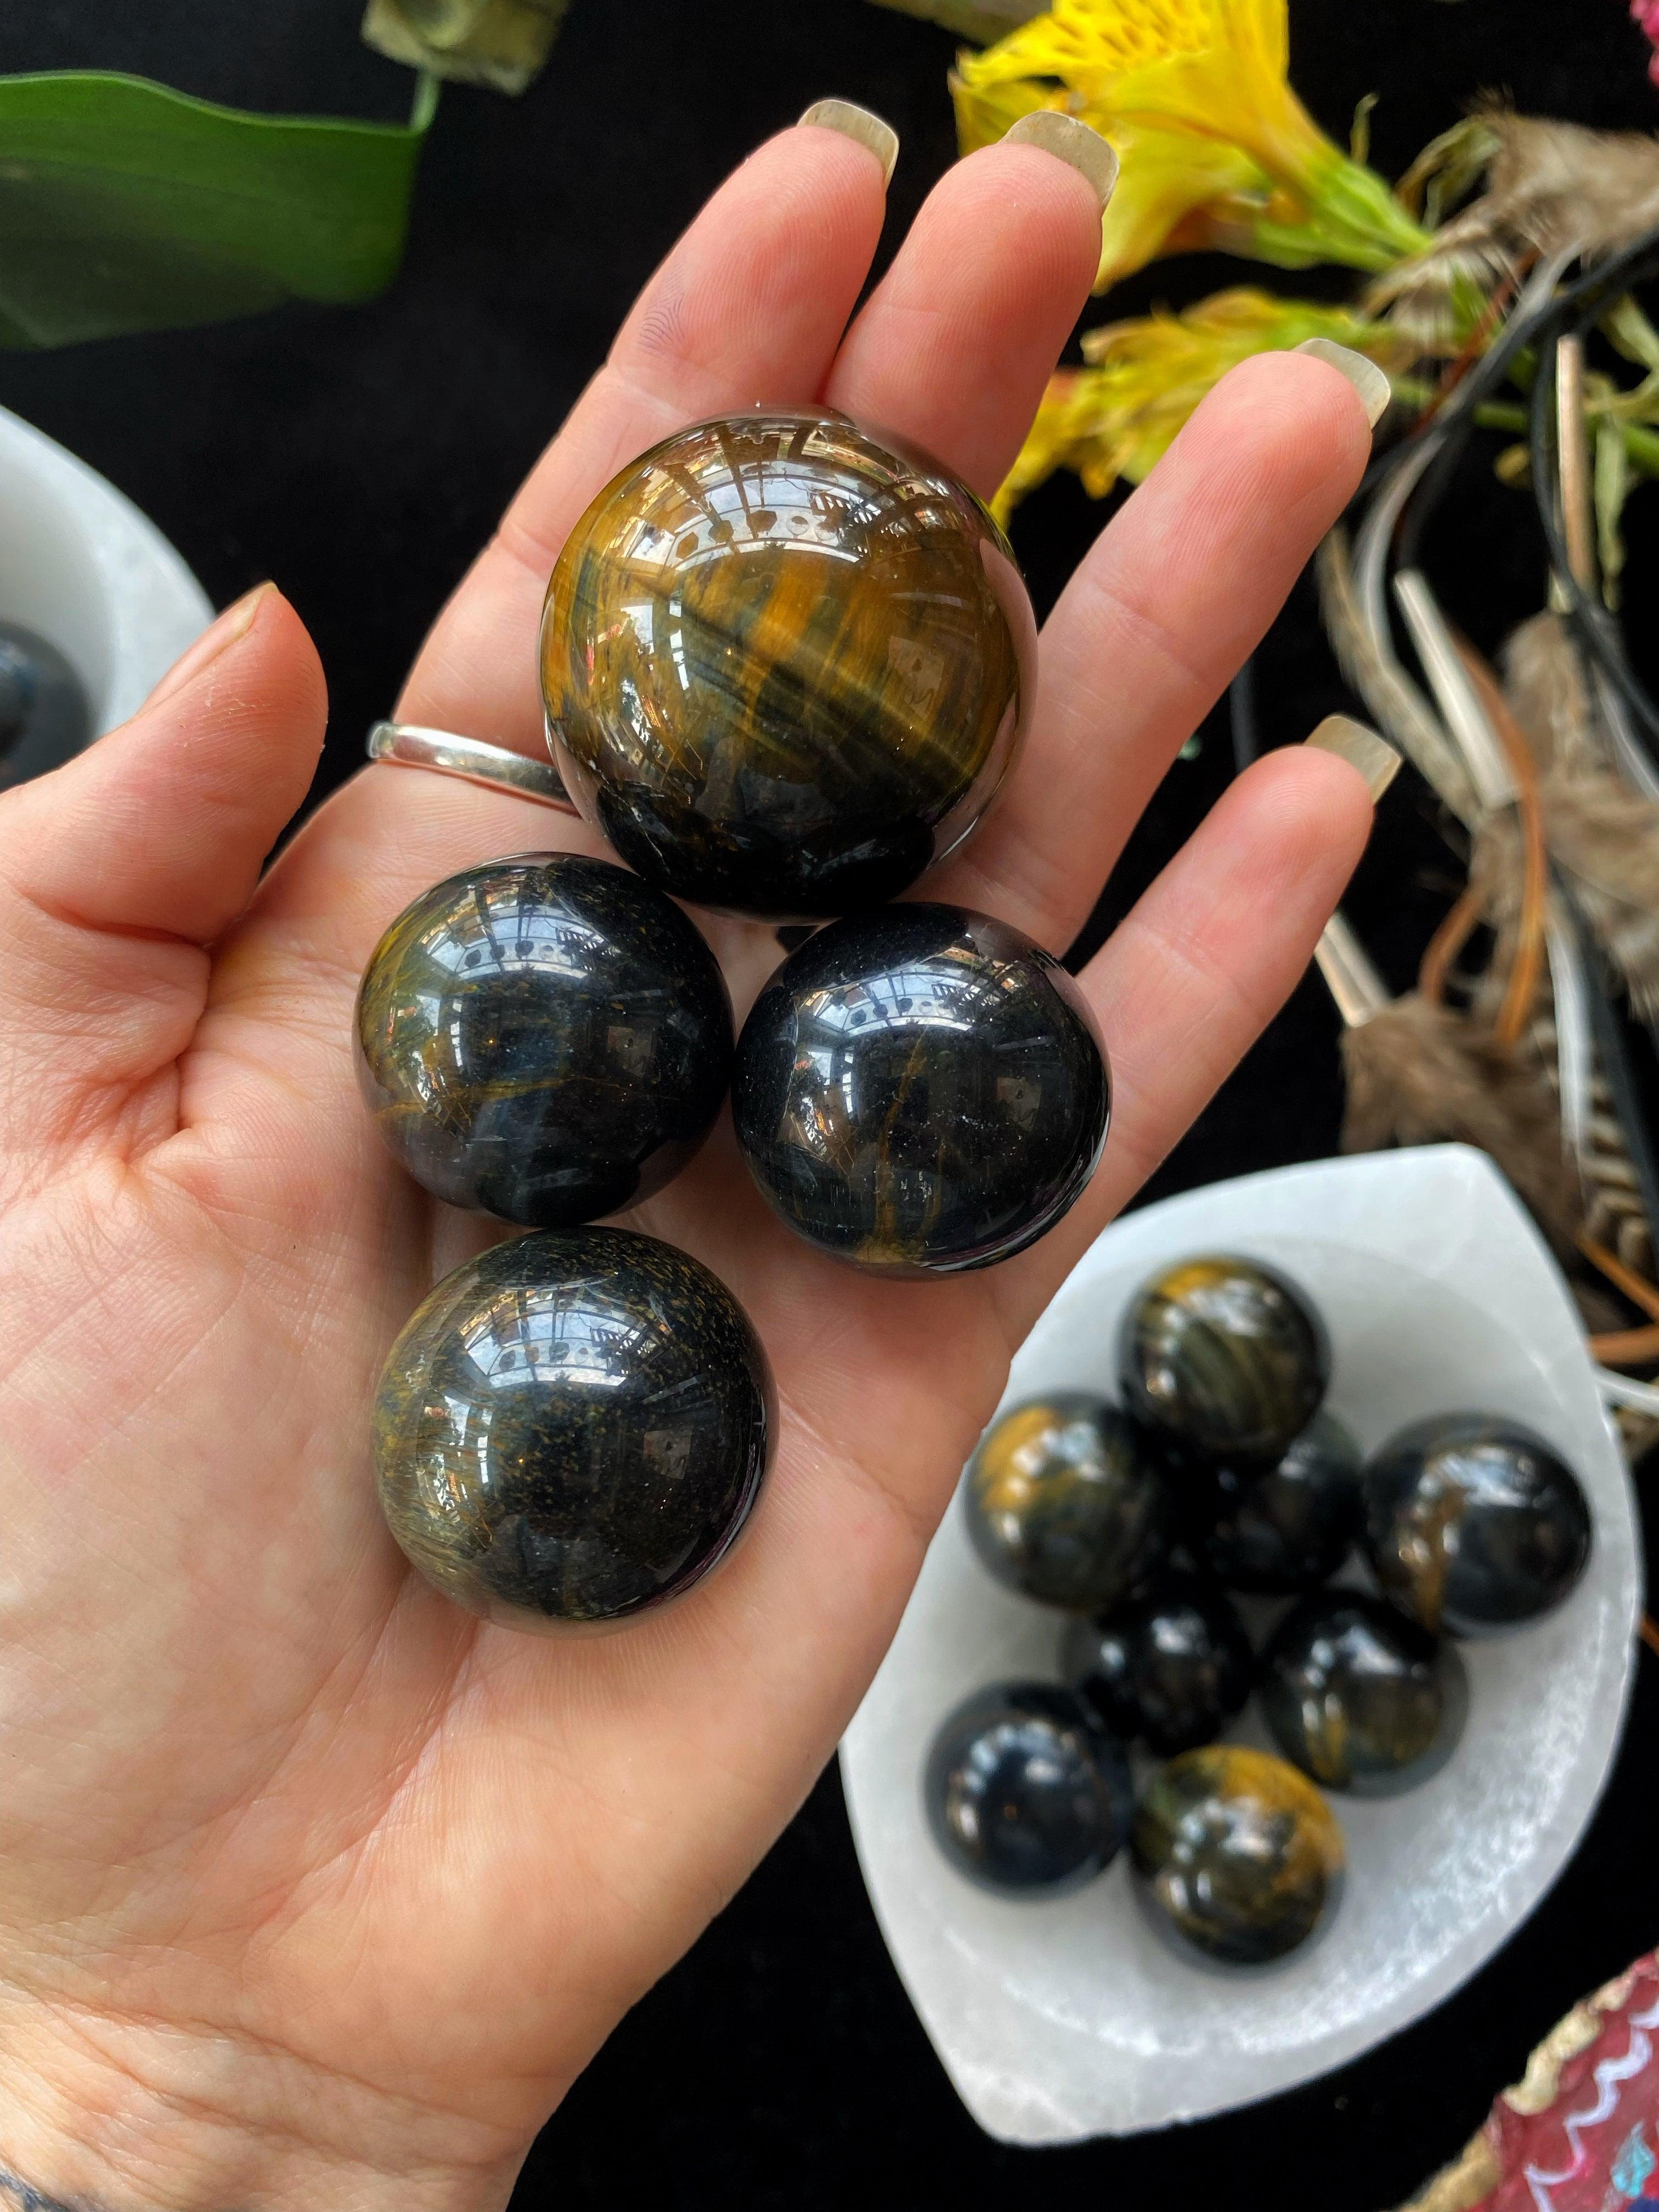 Hawkeye Spheres - Blue and Gold Tiger's Eye Crystal Ball - Keven Craft Rituals